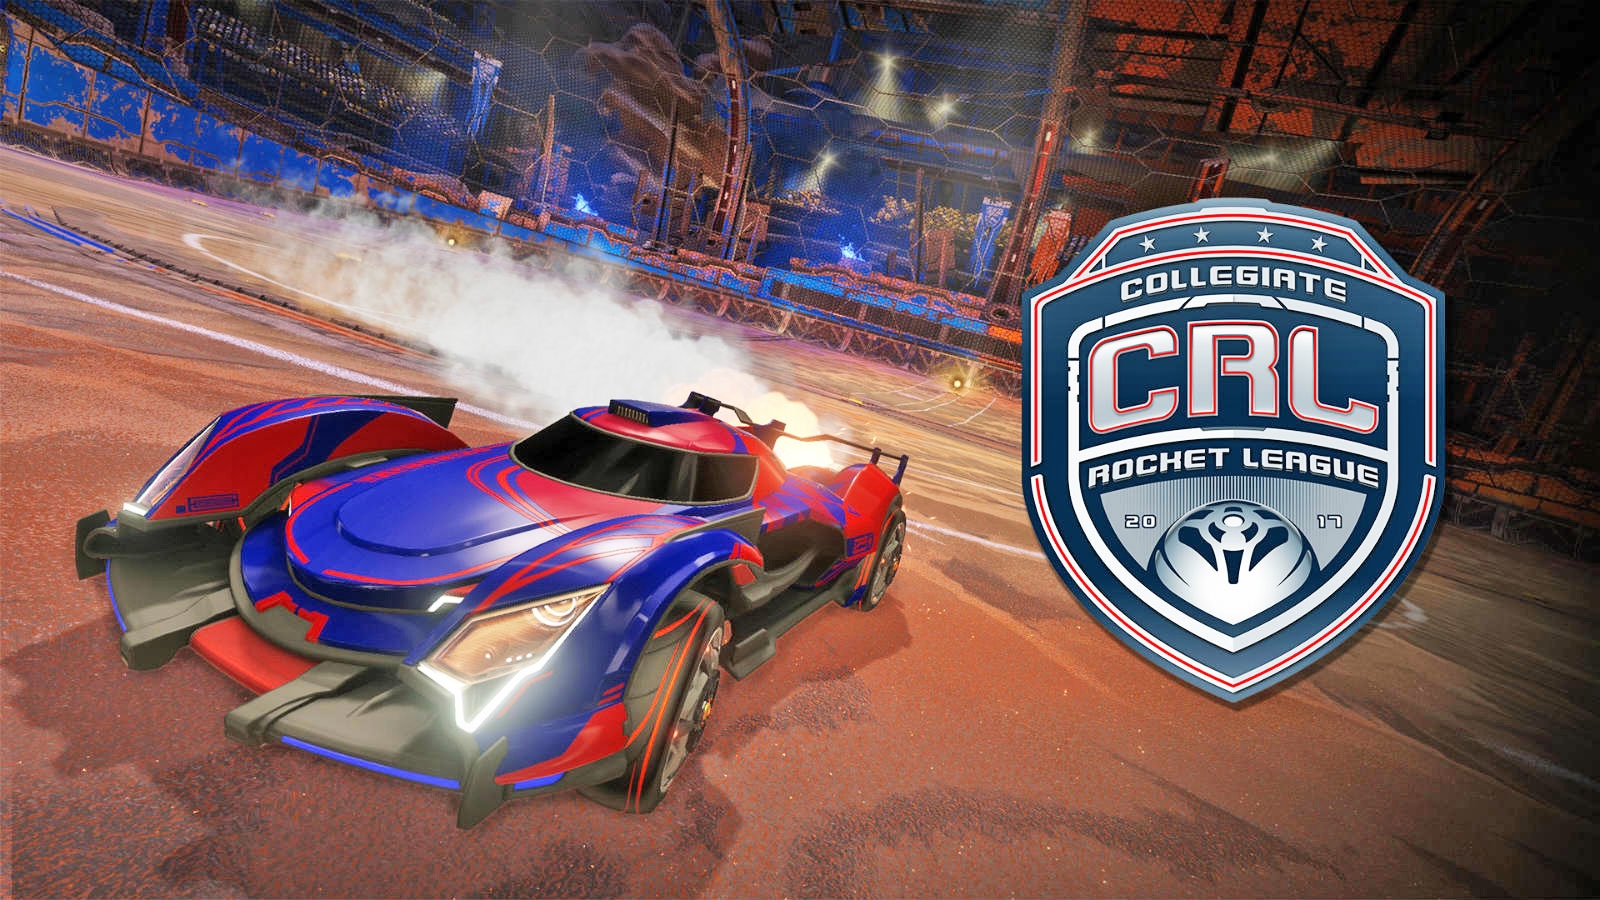 'Collegiate Rocket League' is invading campuses this fall | DeviceDaily.com